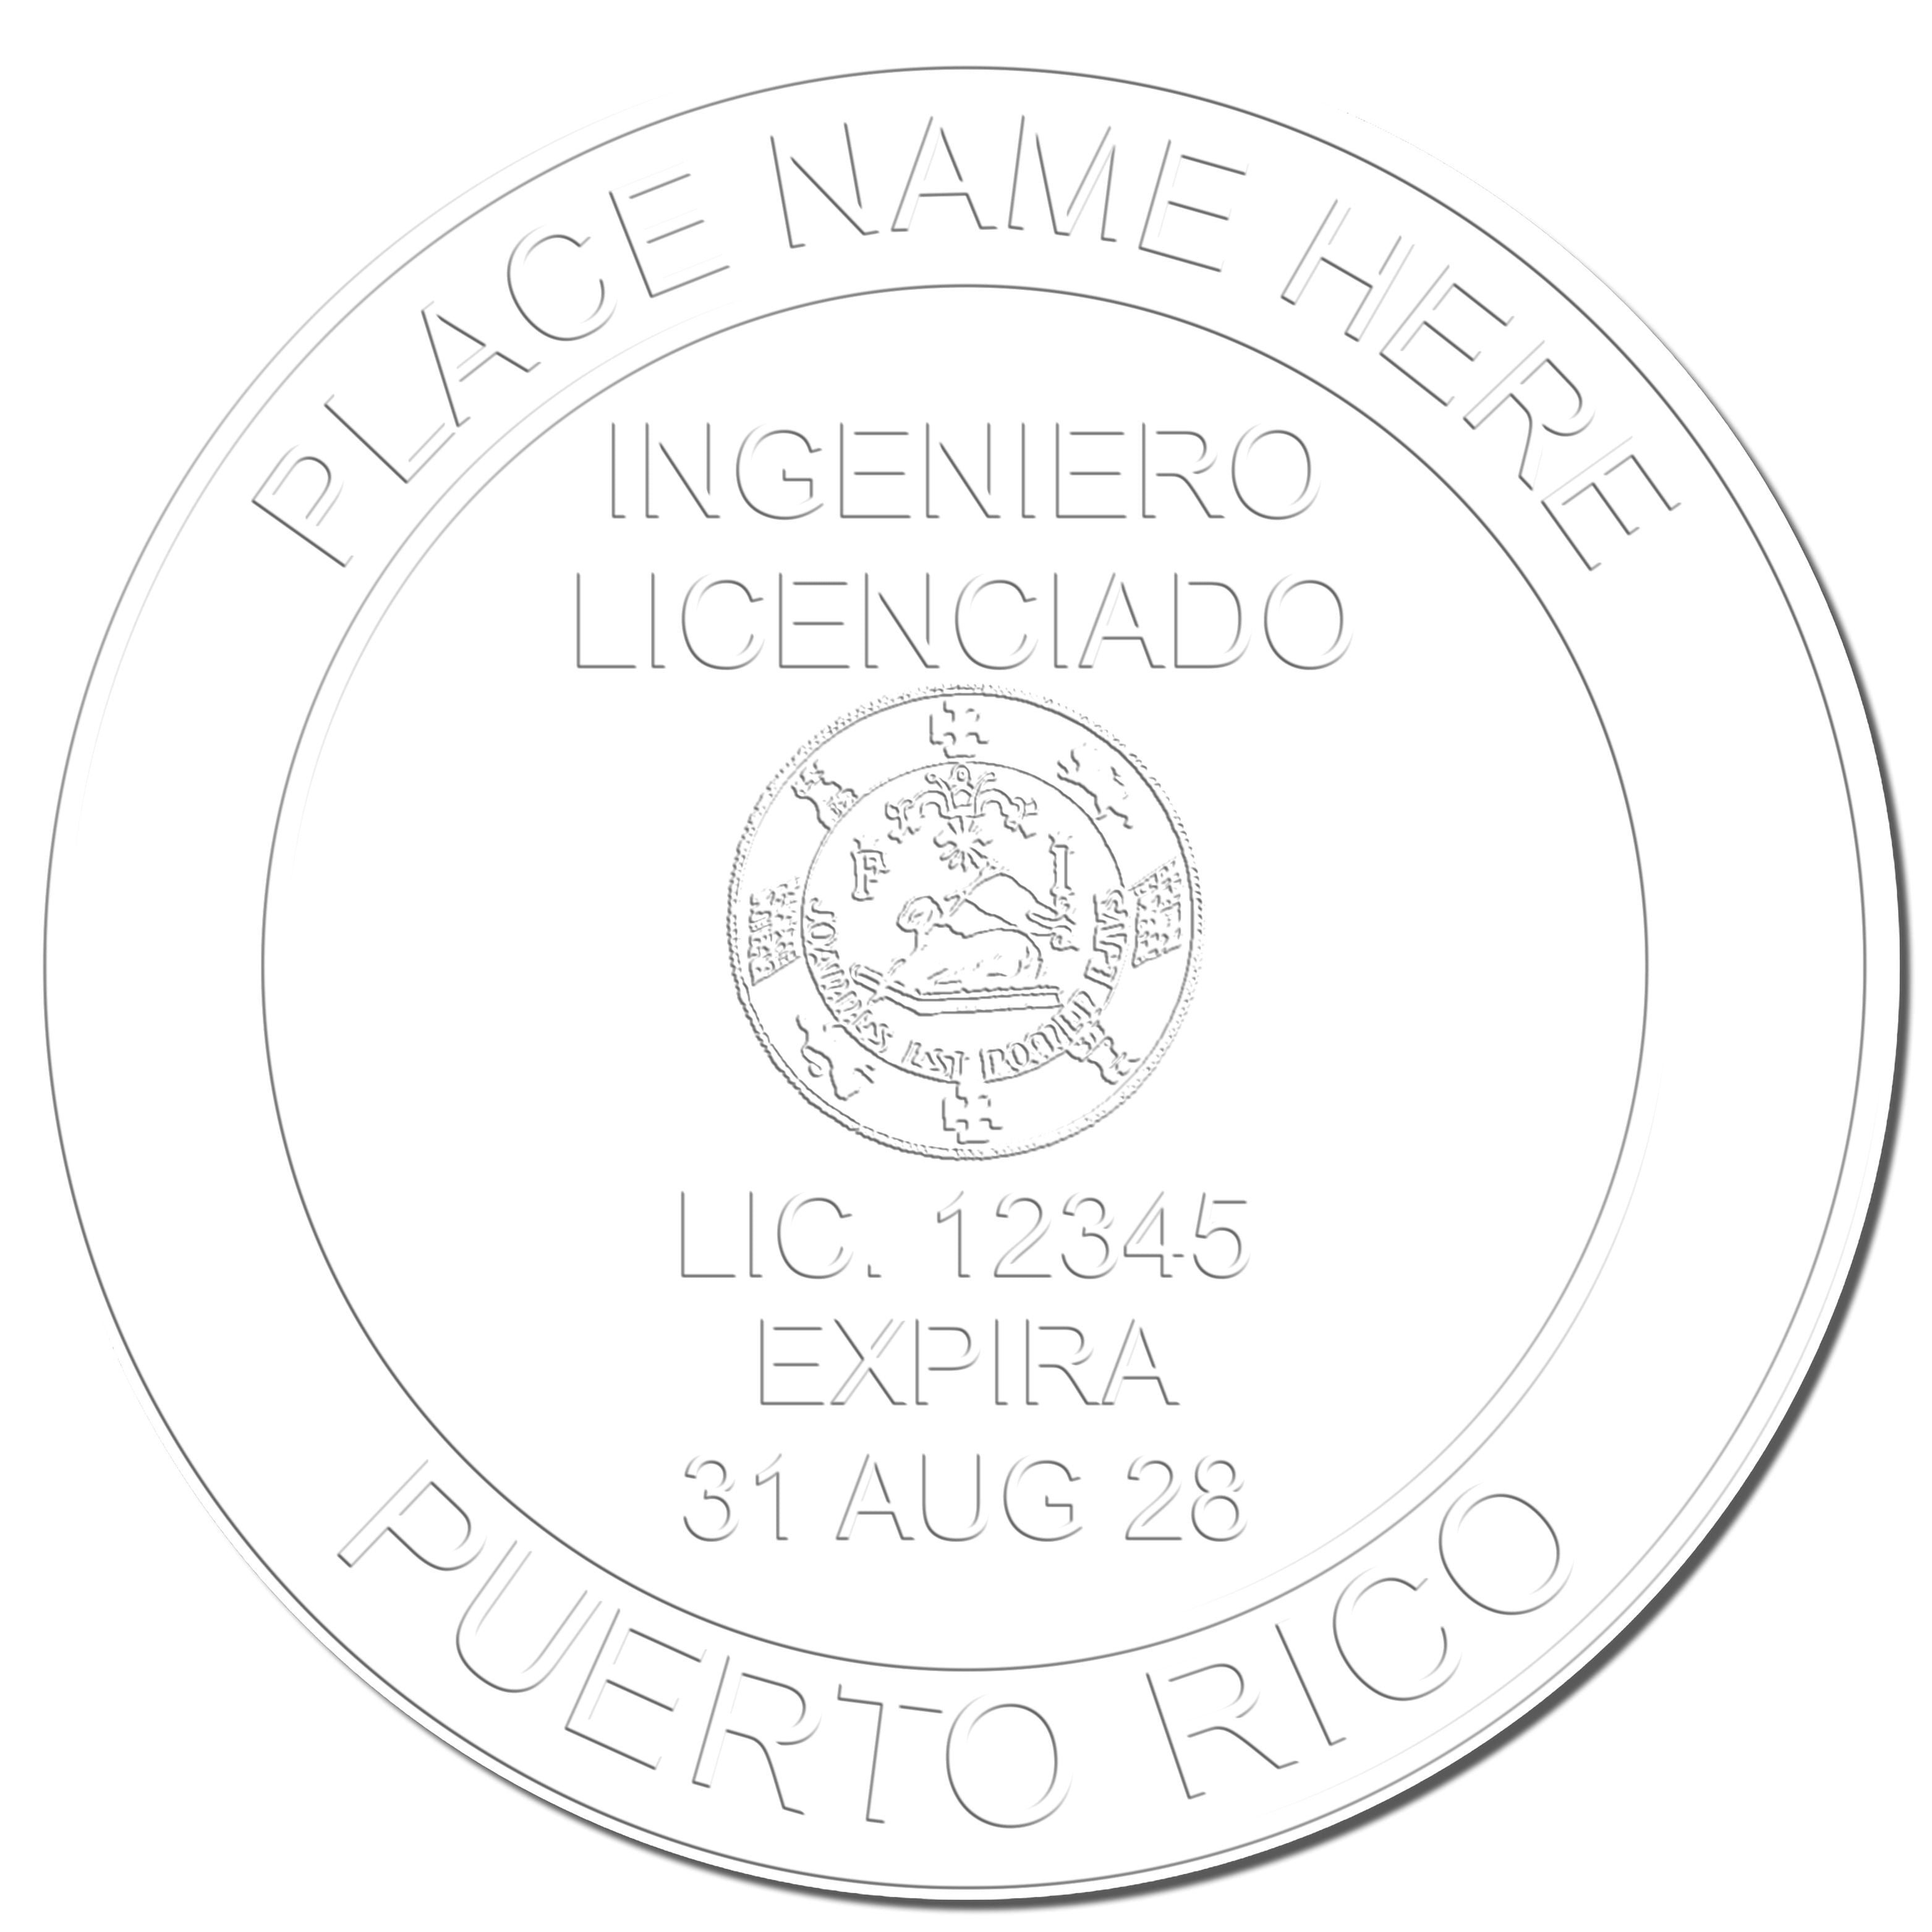 This paper is stamped with a sample imprint of the State of Puerto Rico Extended Long Reach Engineer Seal, signifying its quality and reliability.